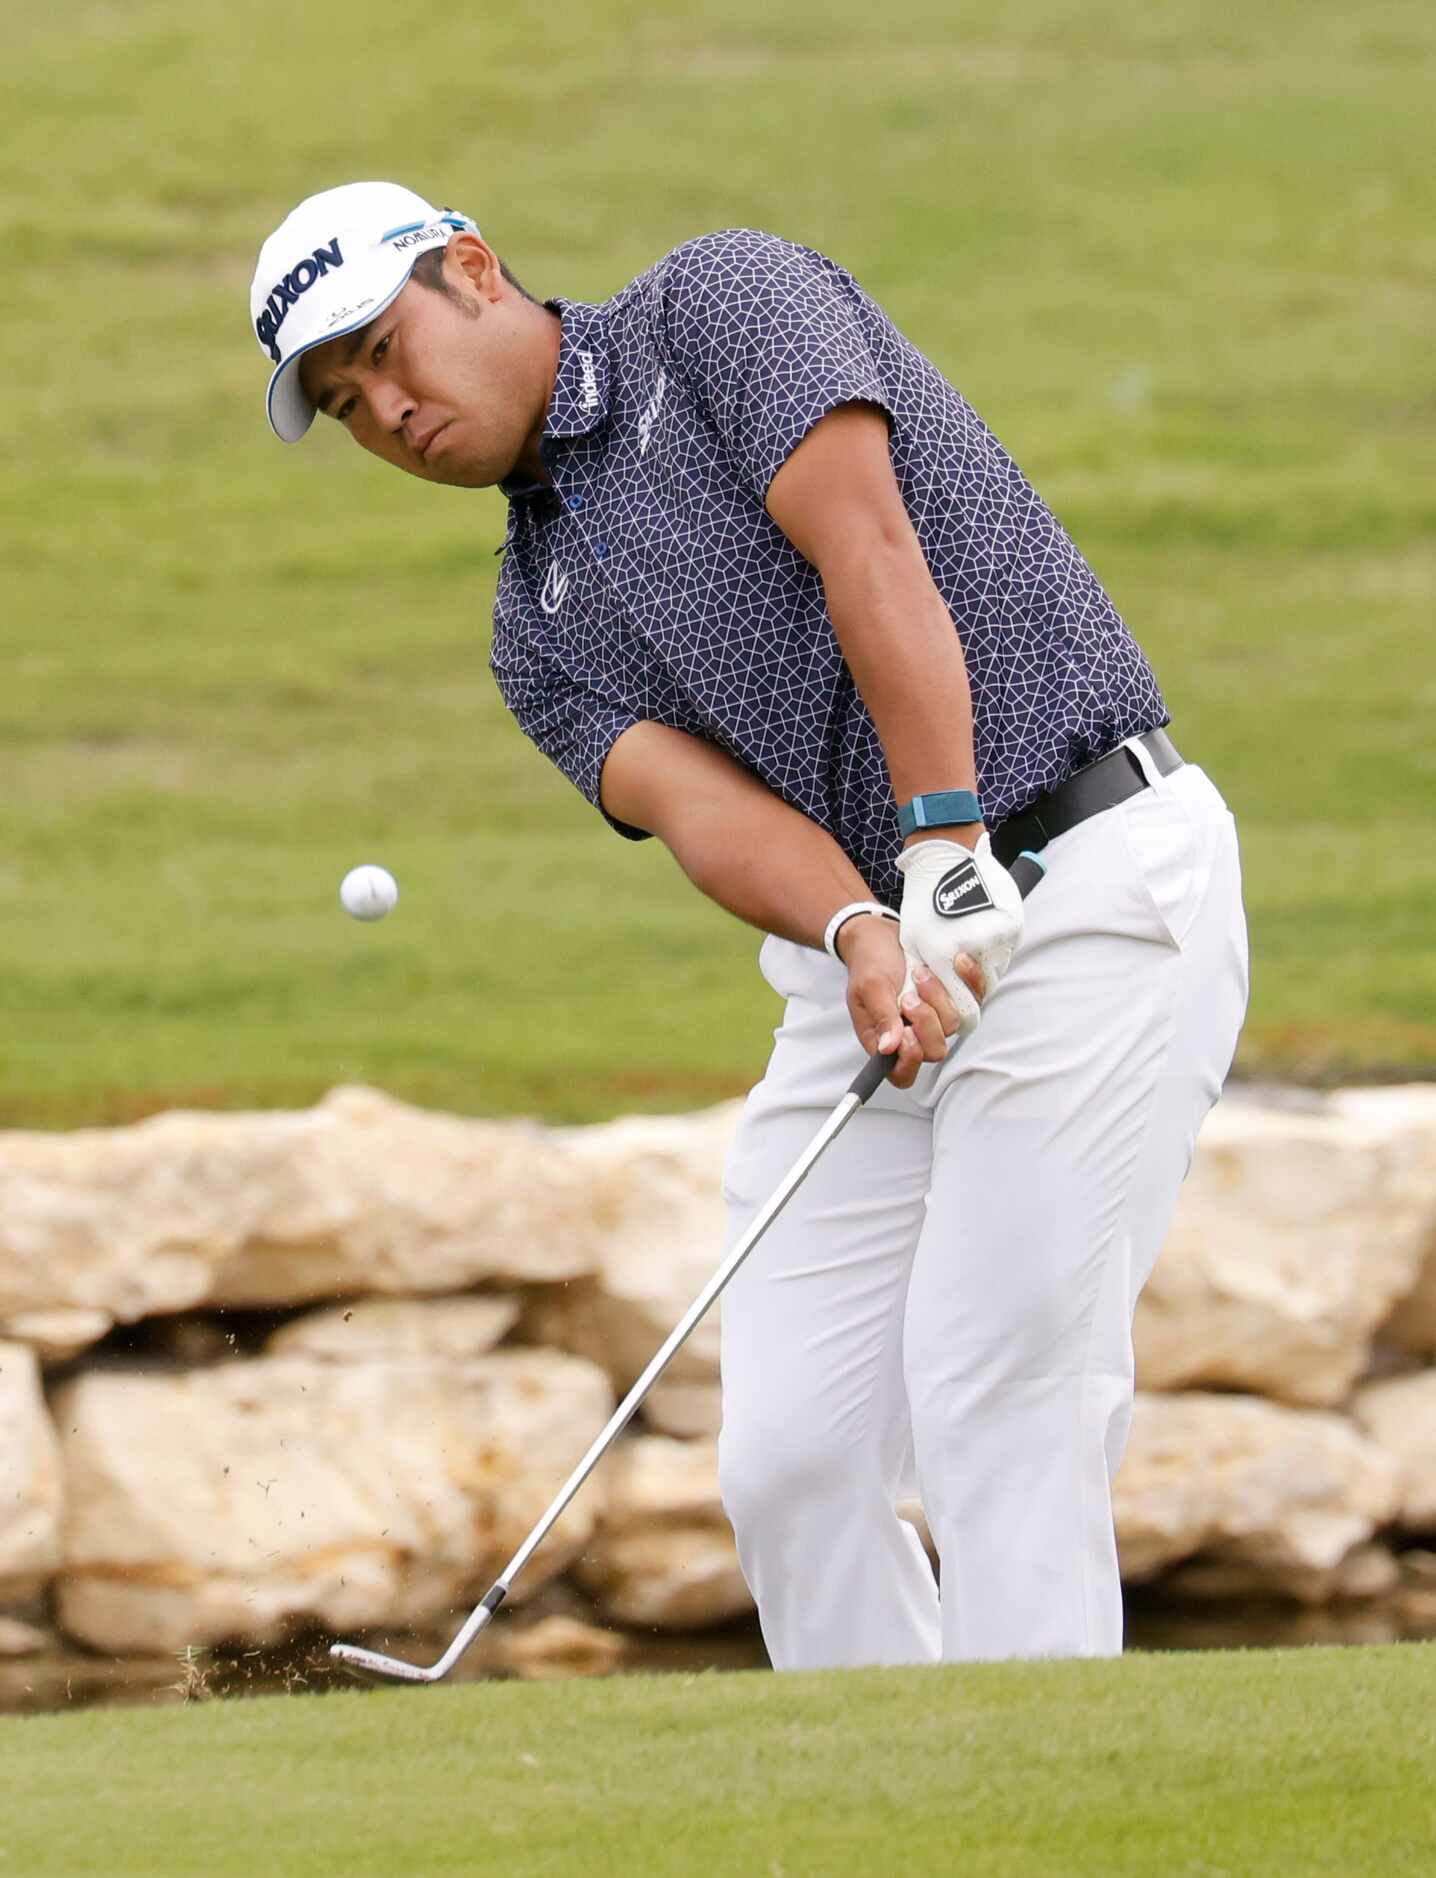 Hideki Matsuyama hits on the green on the 18th hole during round 2 of the AT&T Byron Nelson ...